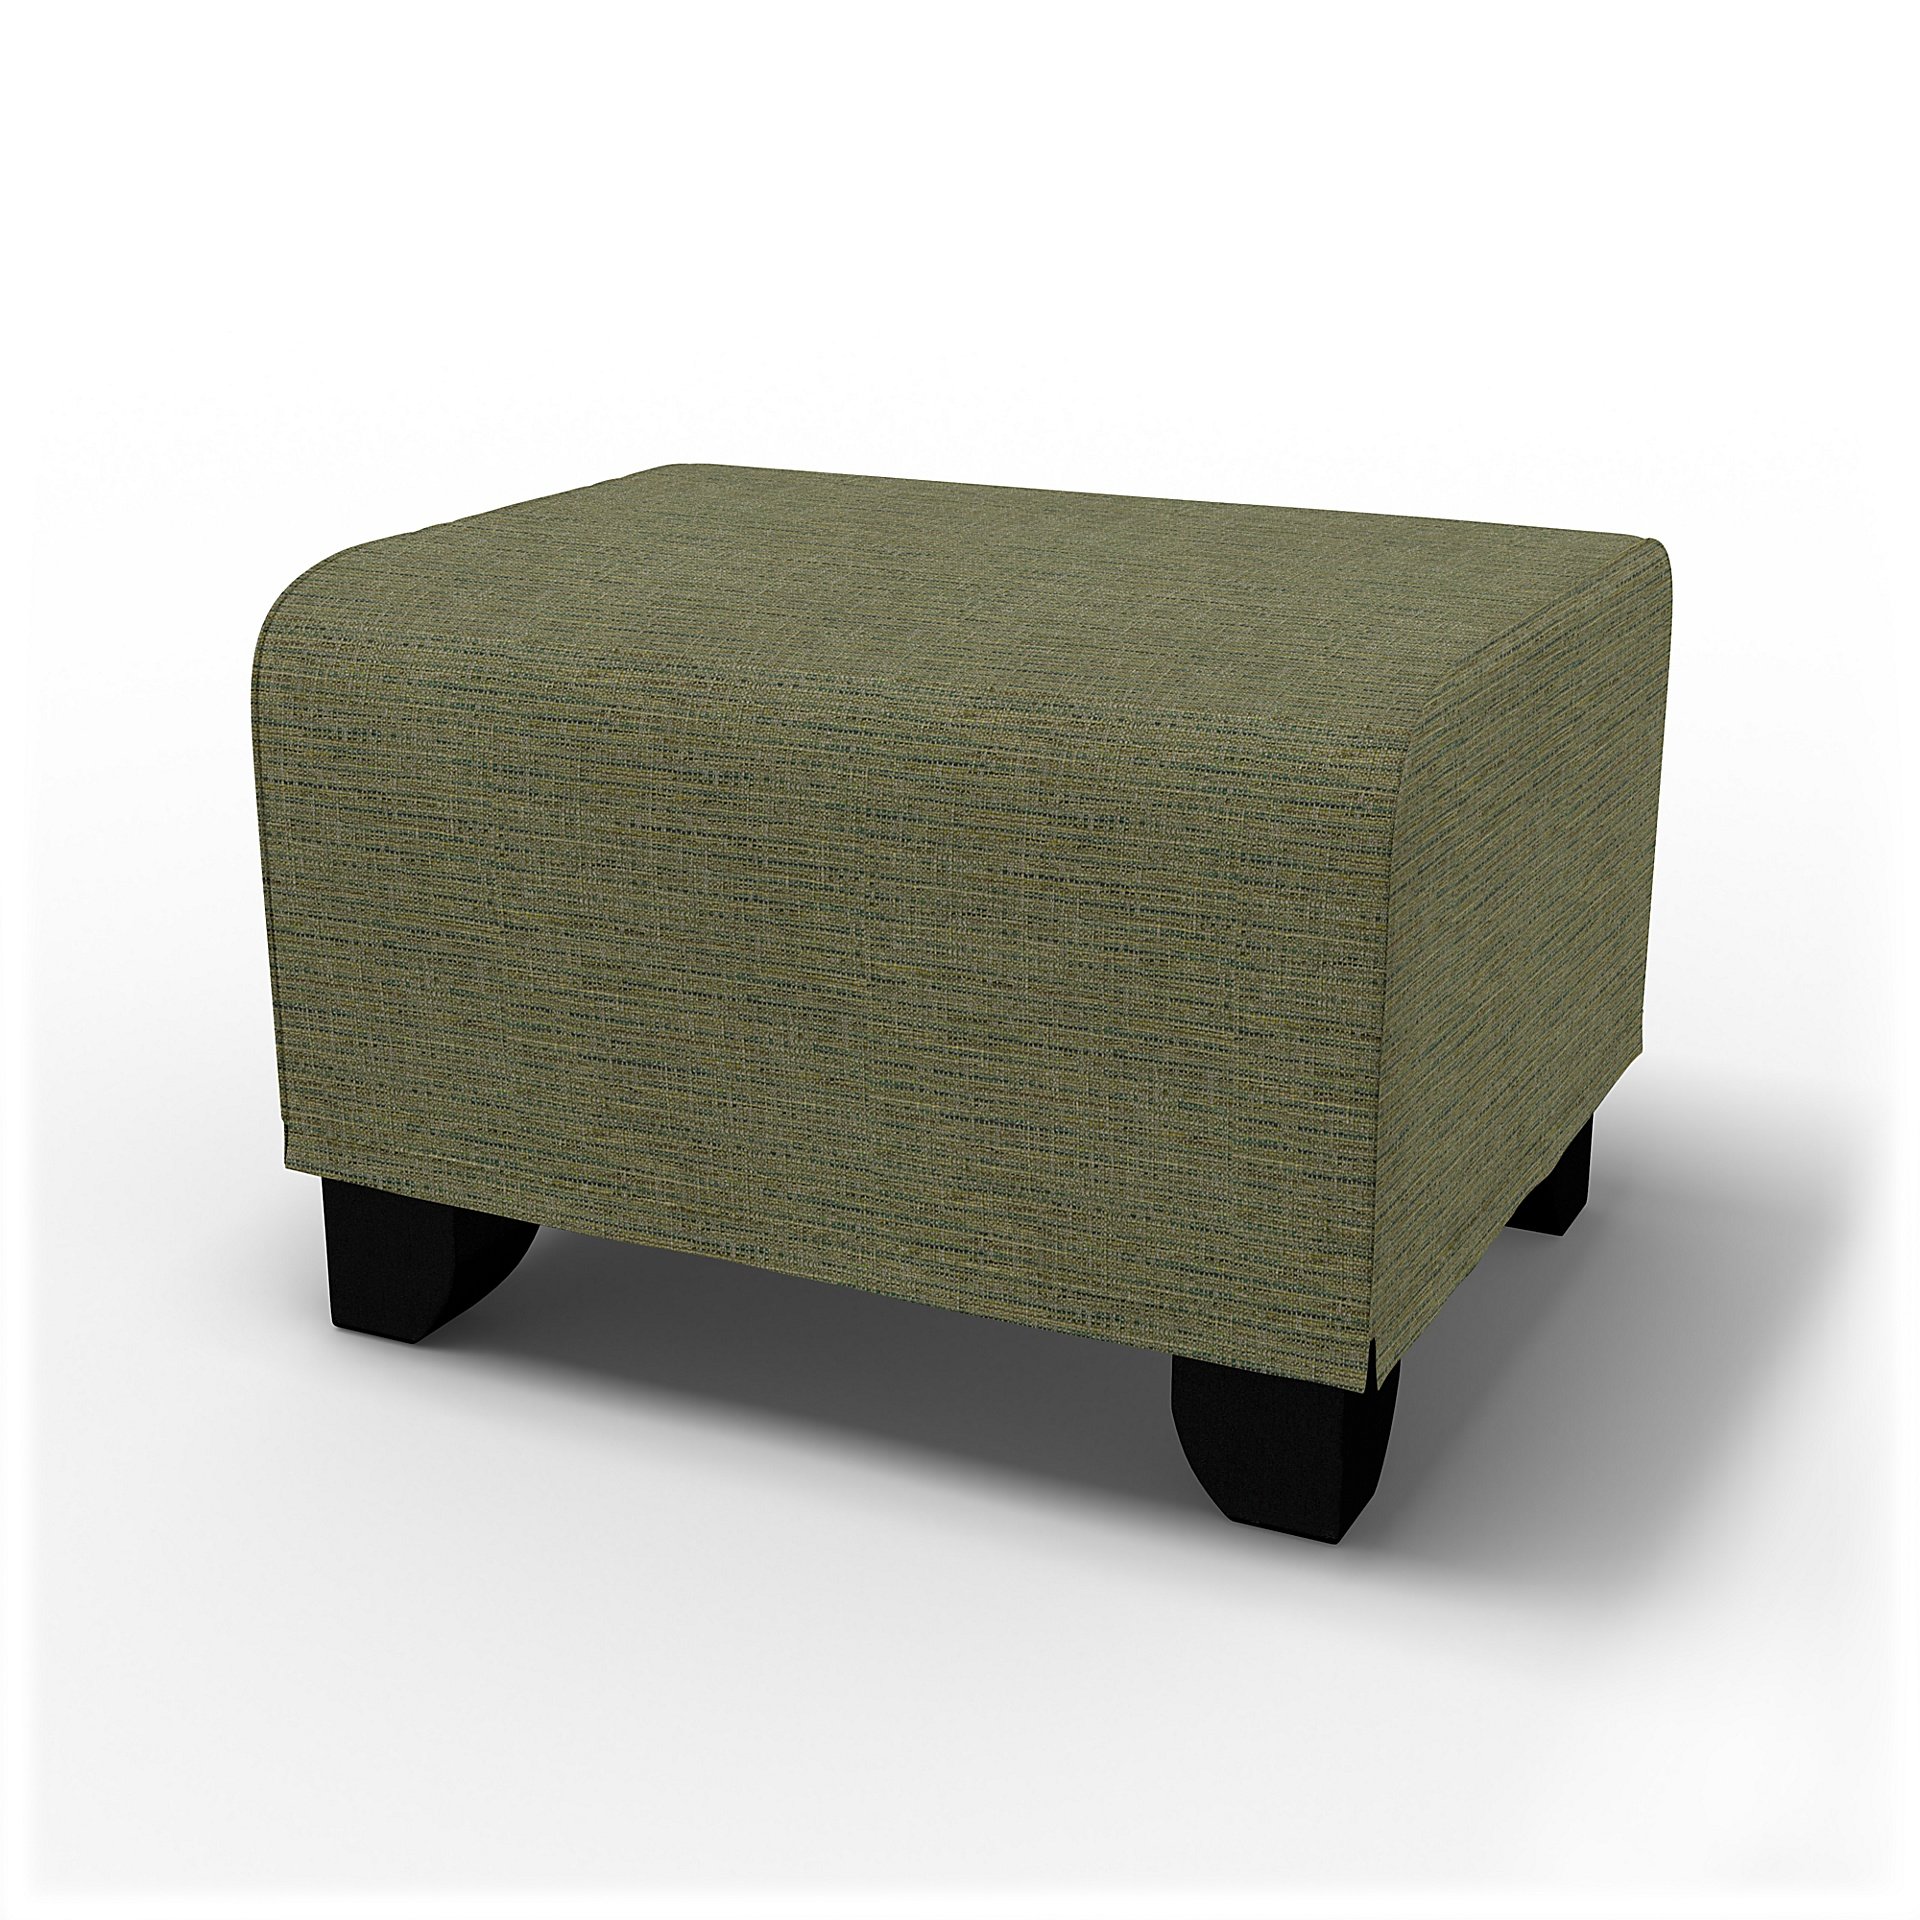 IKEA - Gronlid Footstool Cover, Meadow Green, Boucle & Texture - Bemz